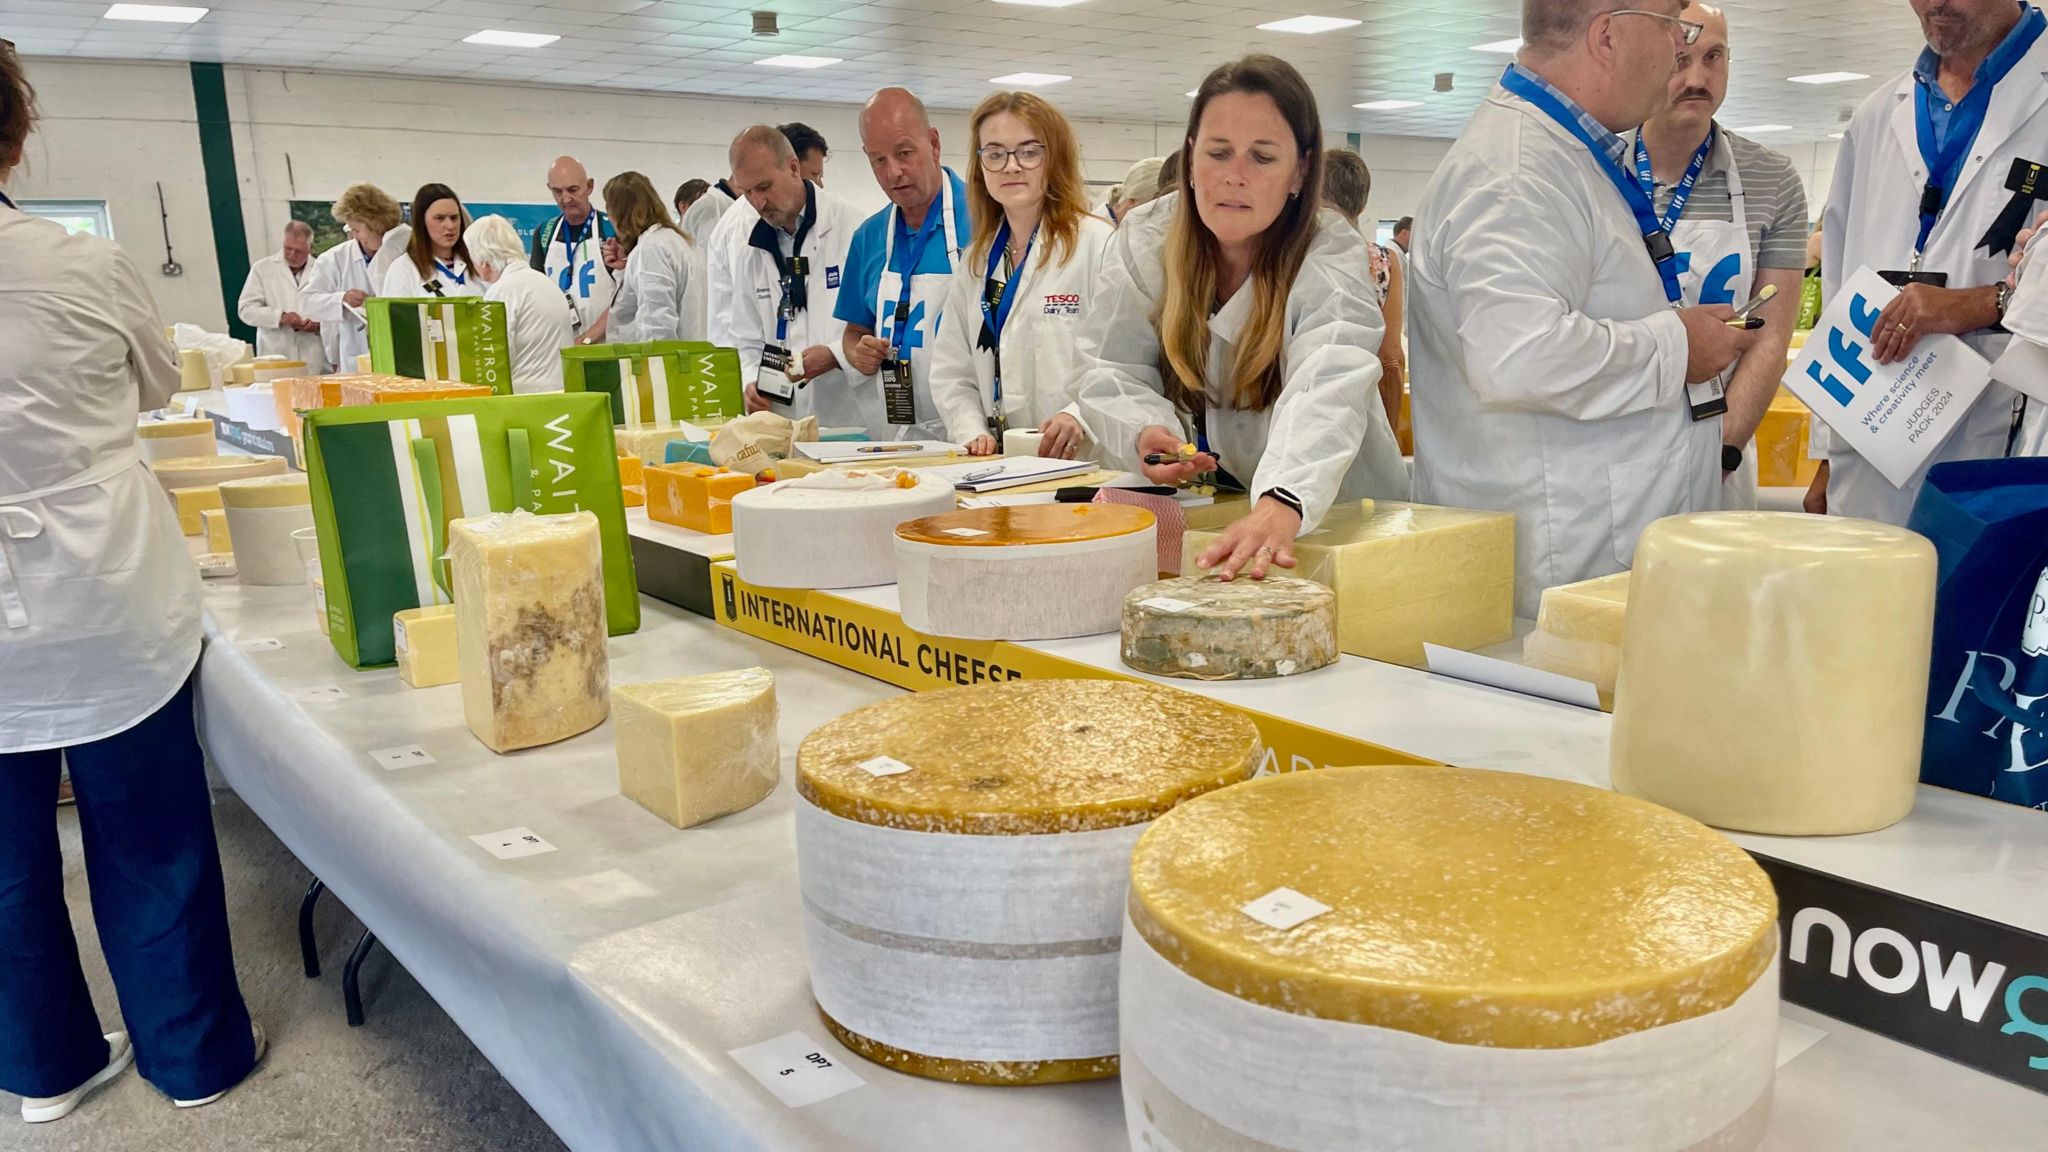 Large blocks of cheese laid across long white tables are judged by numerous people dressed in white coats.